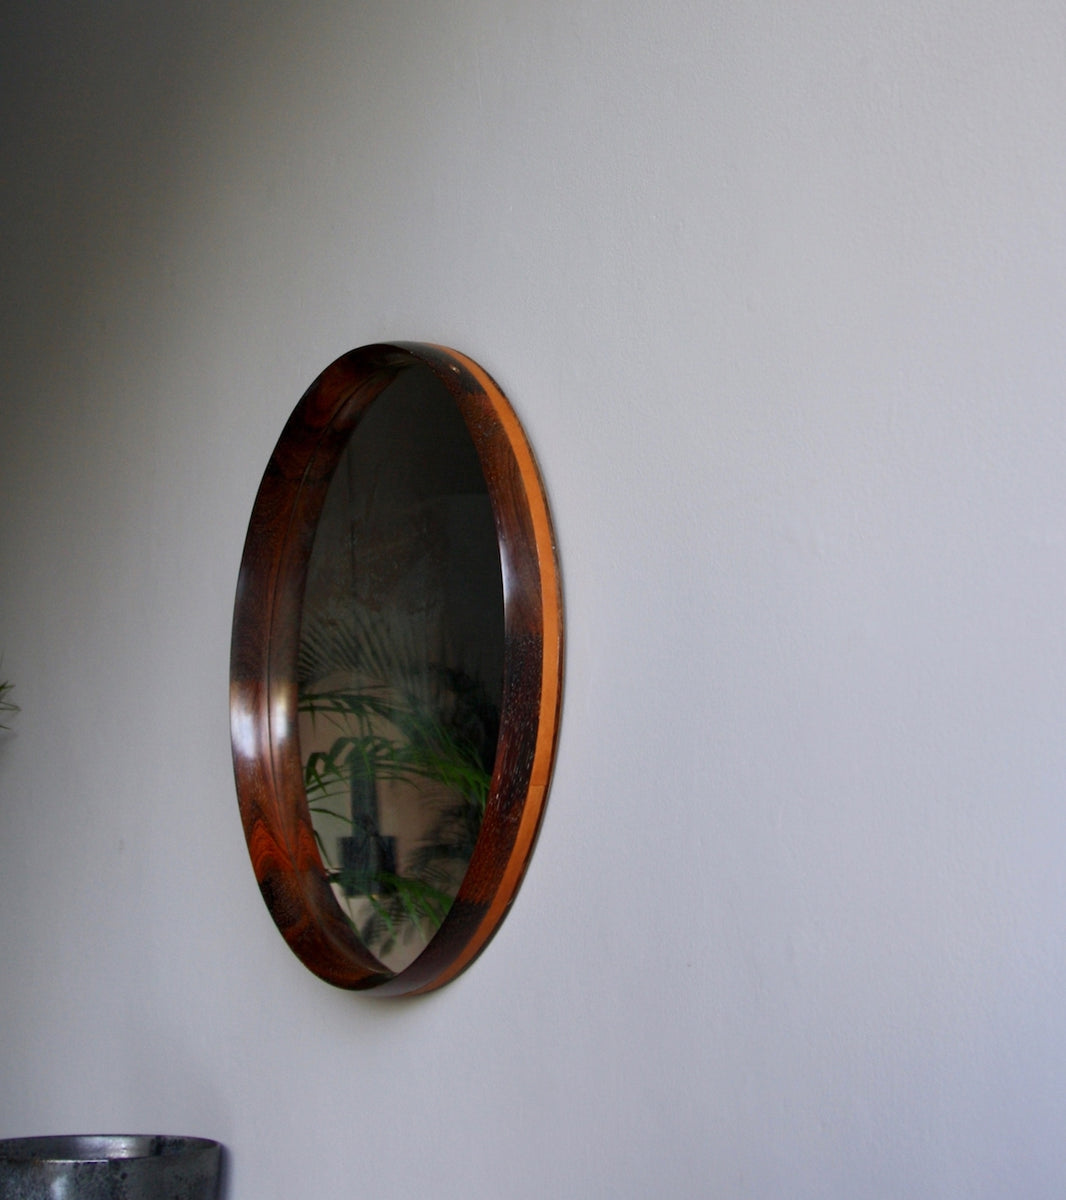 Rosewood & Leather Mirror Denmark 1950s - Image 3